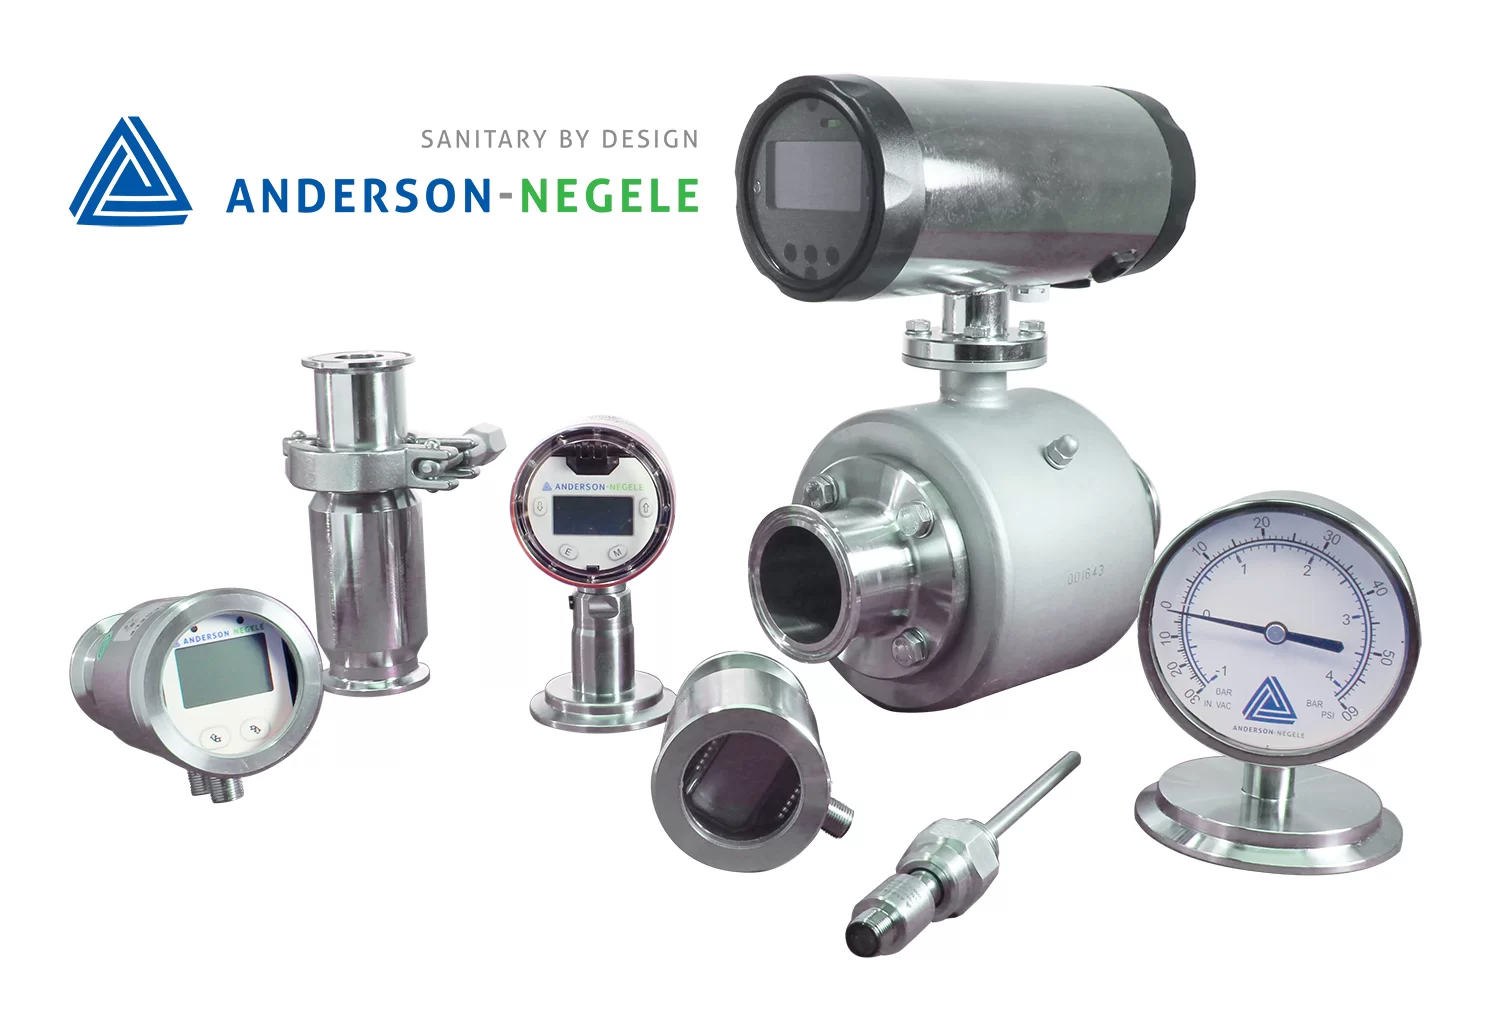 Anderson-Negele Product Family